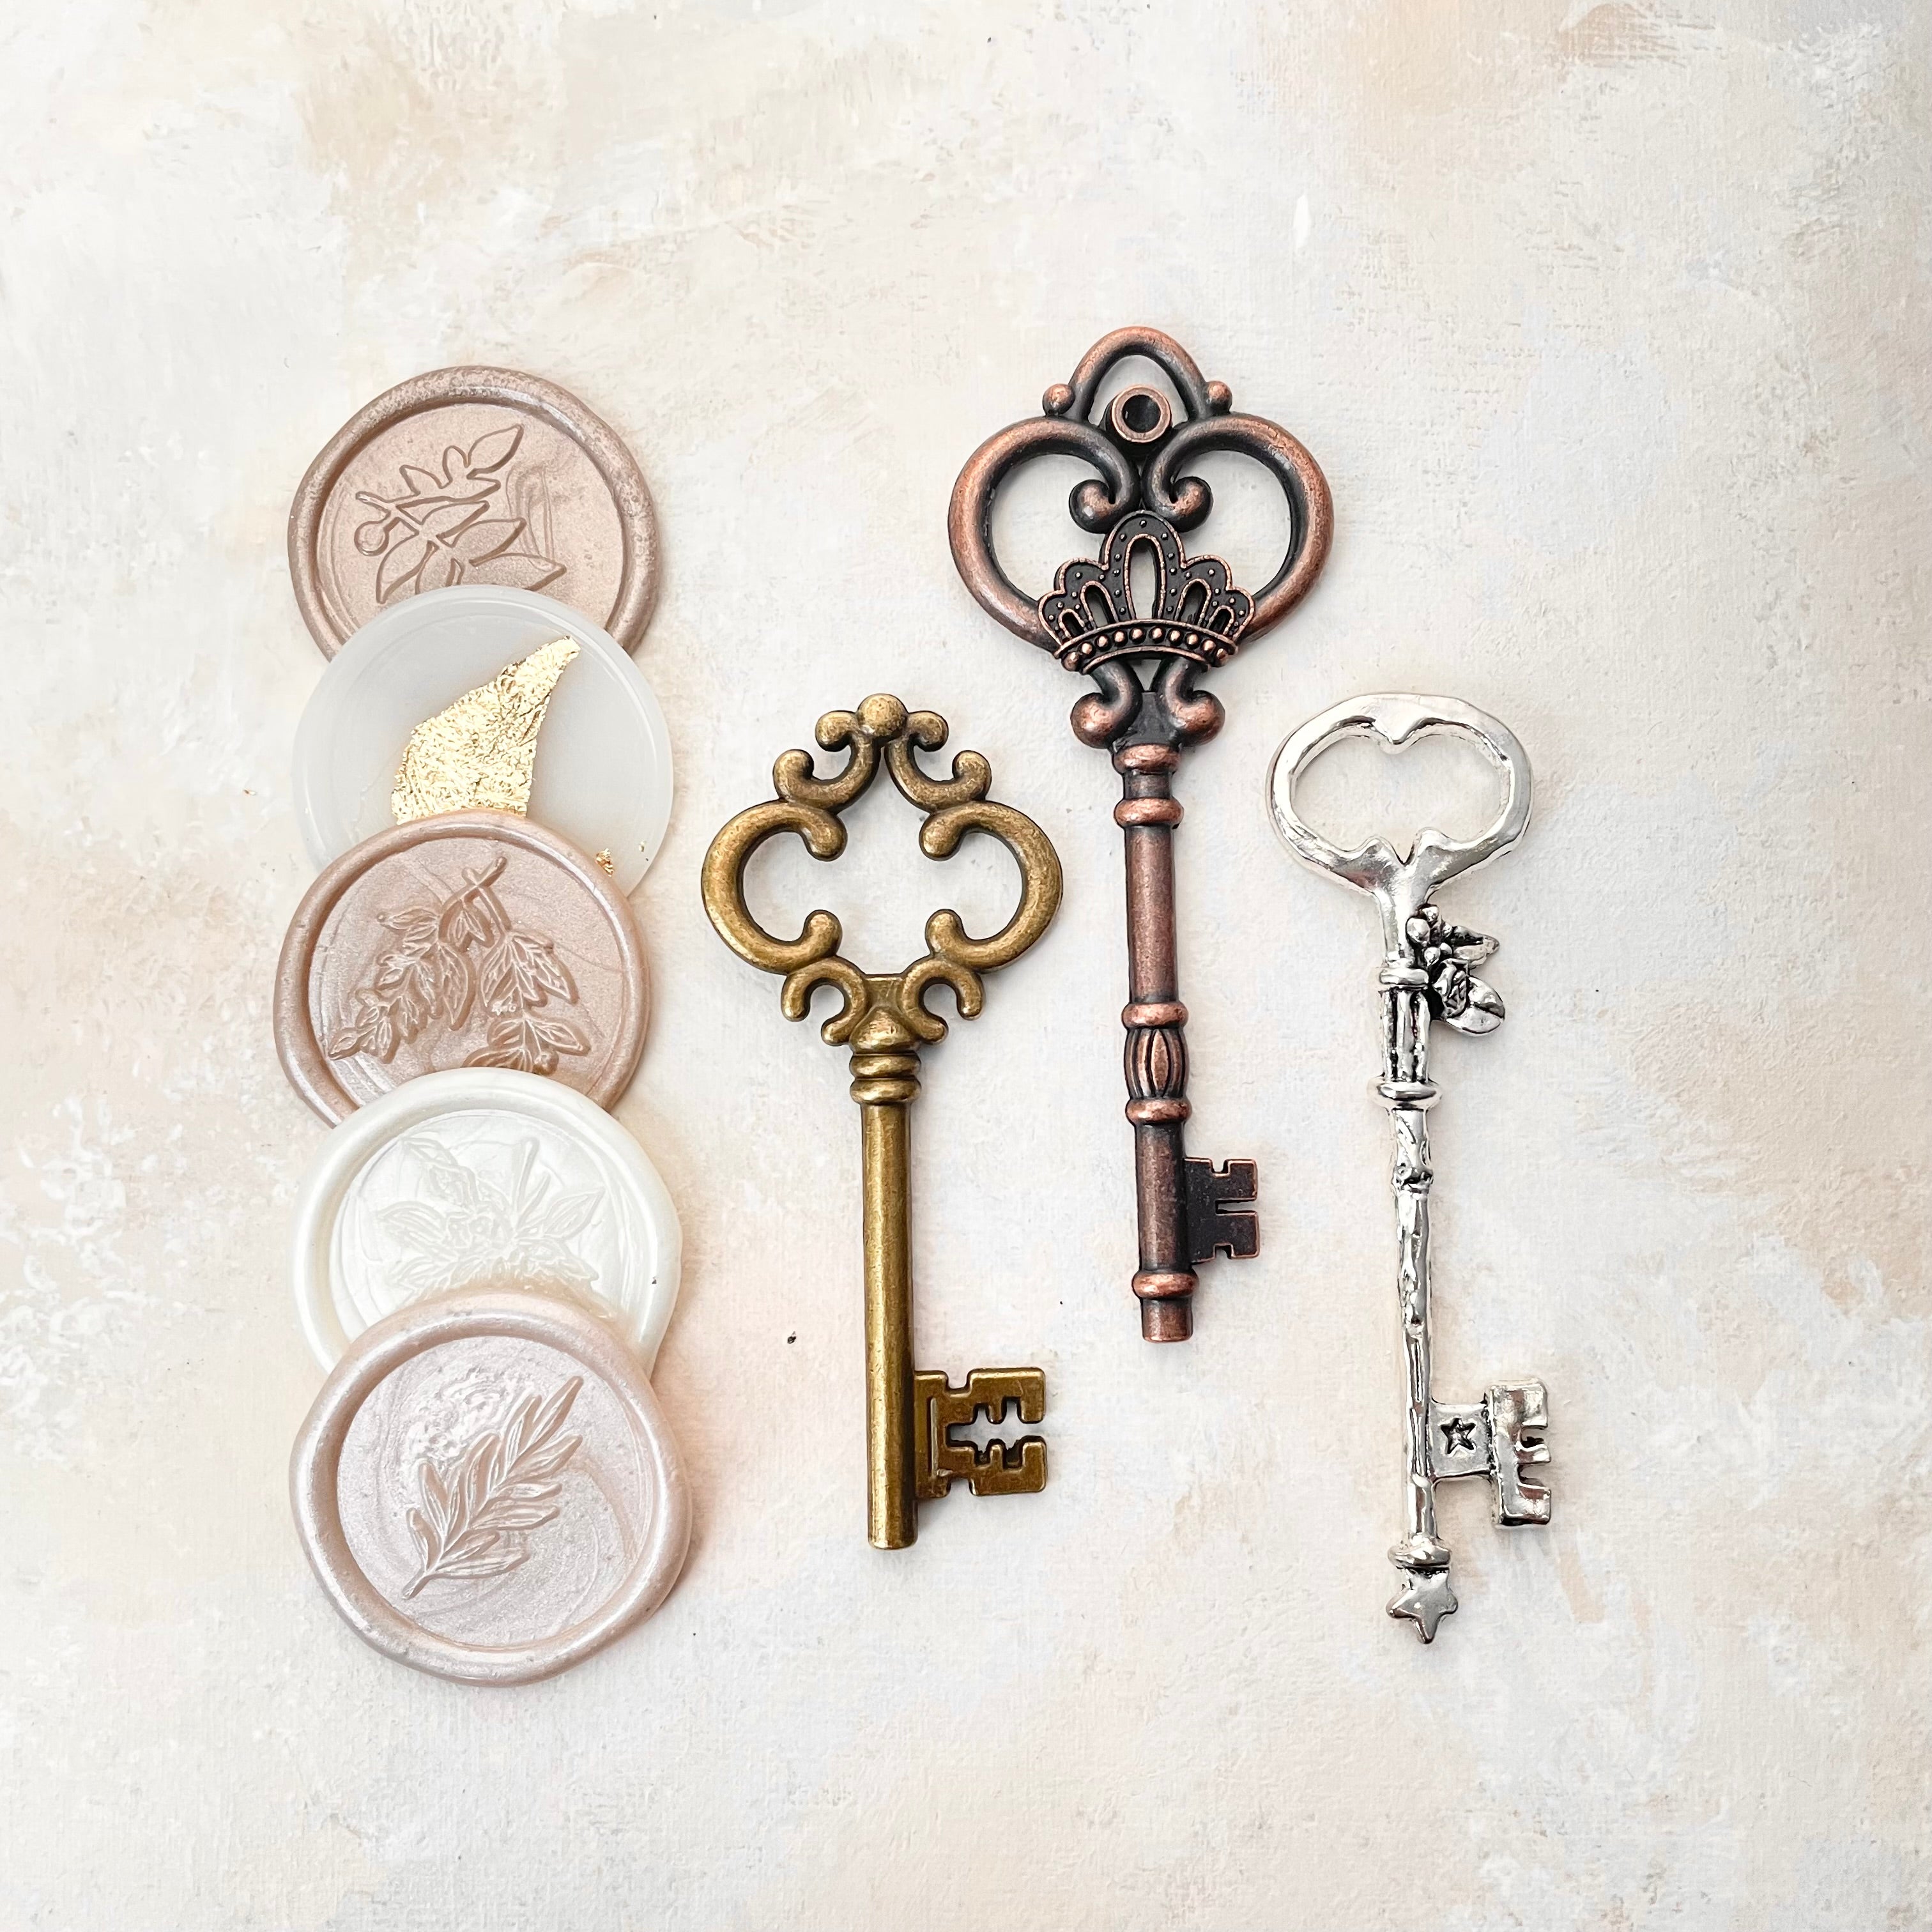 3 keys, gold, bronze and silver and 5 champagne wax seals - Wedding Flat lay props from Champagne & GRIT